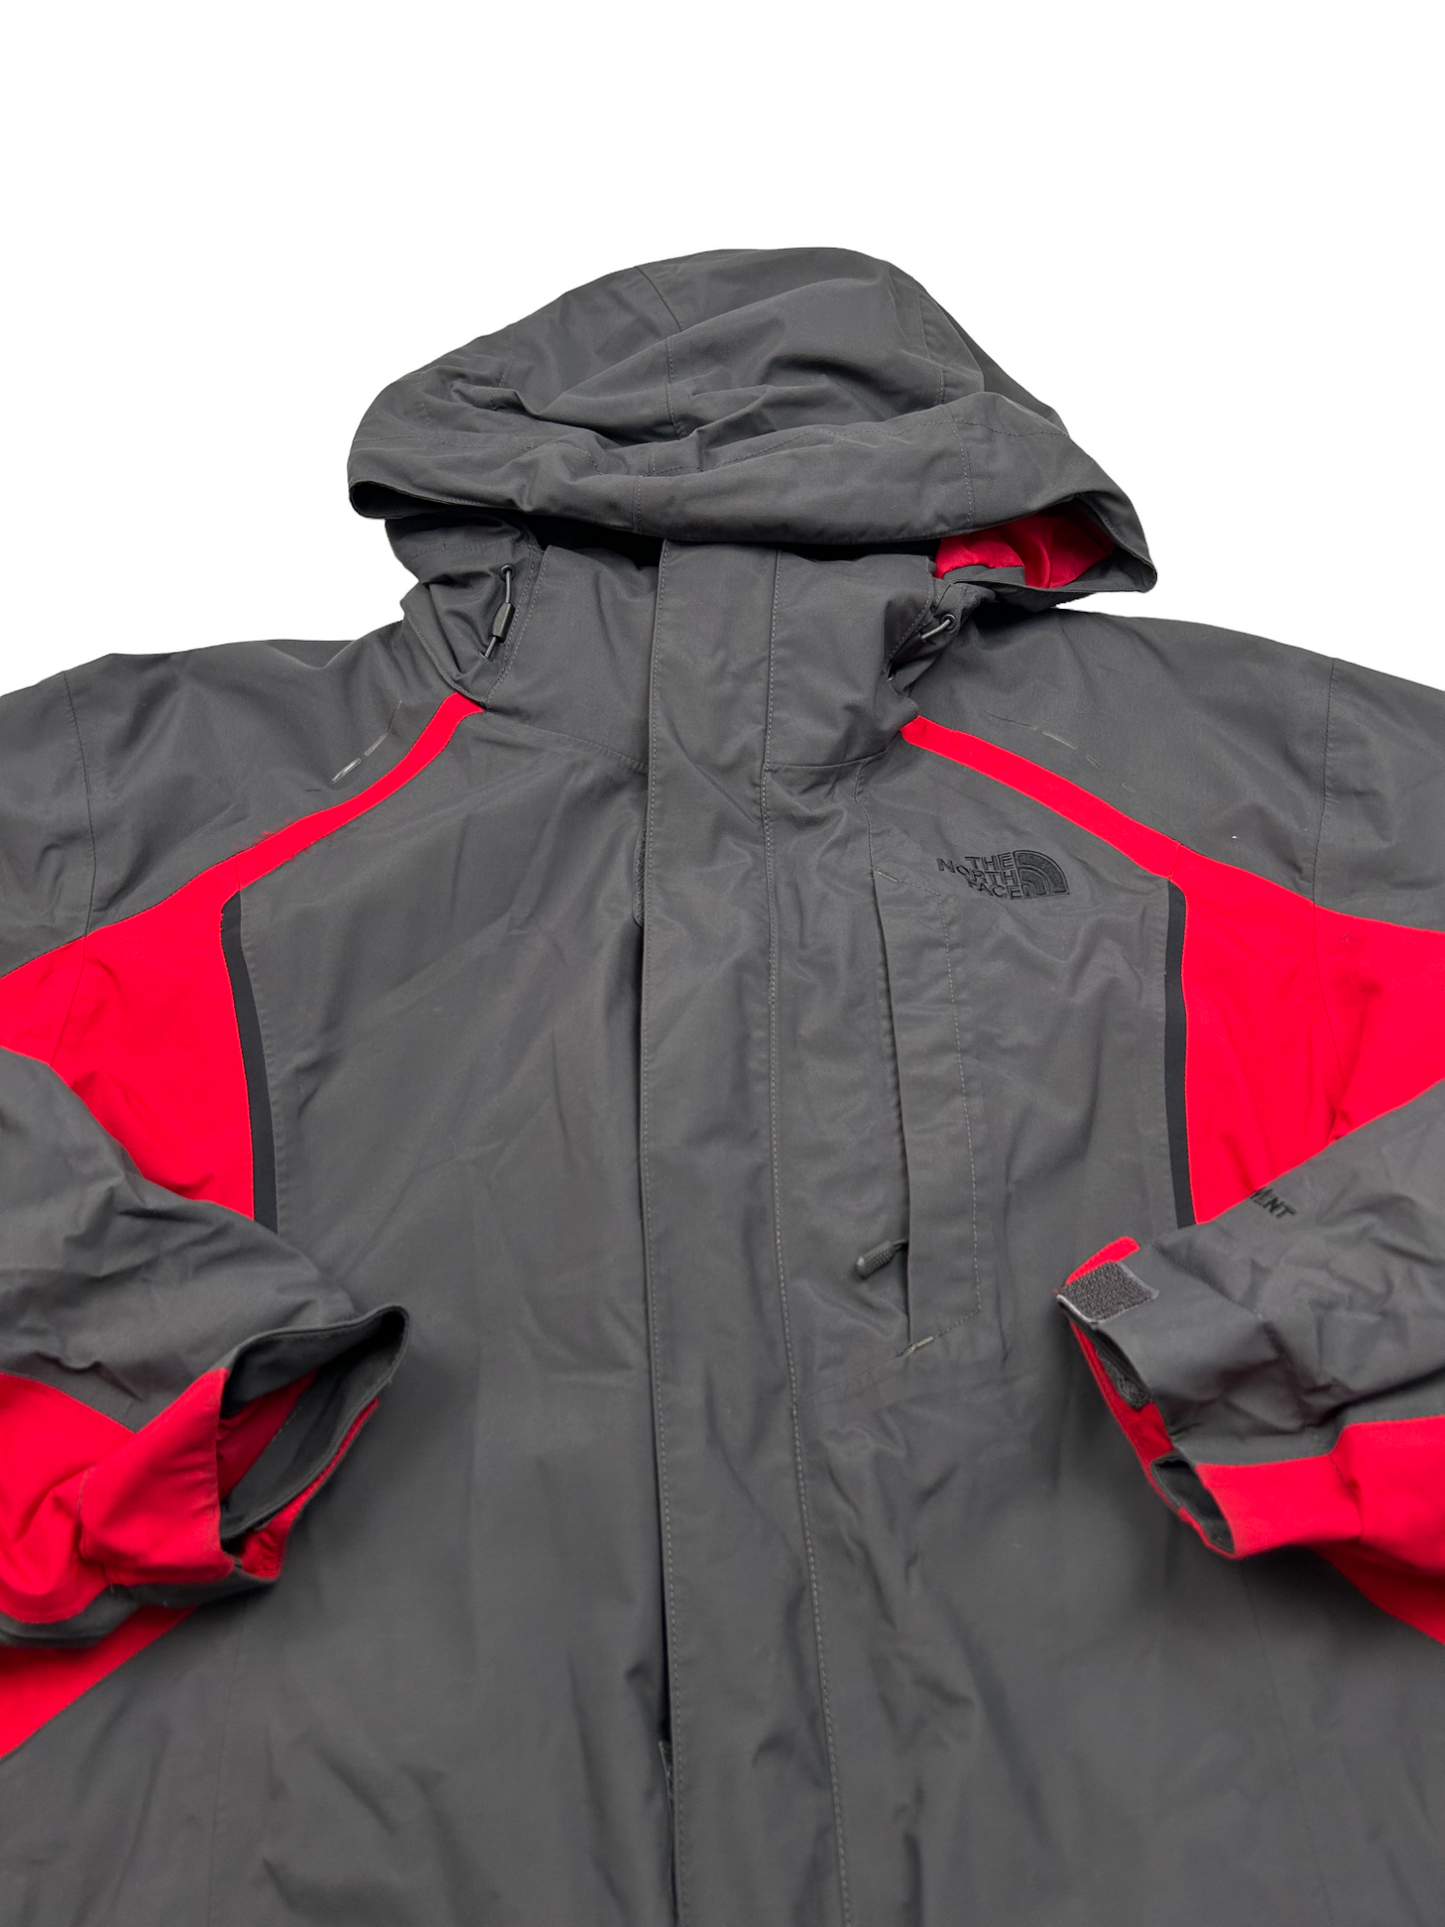 The North Face Grey & Red Jacket